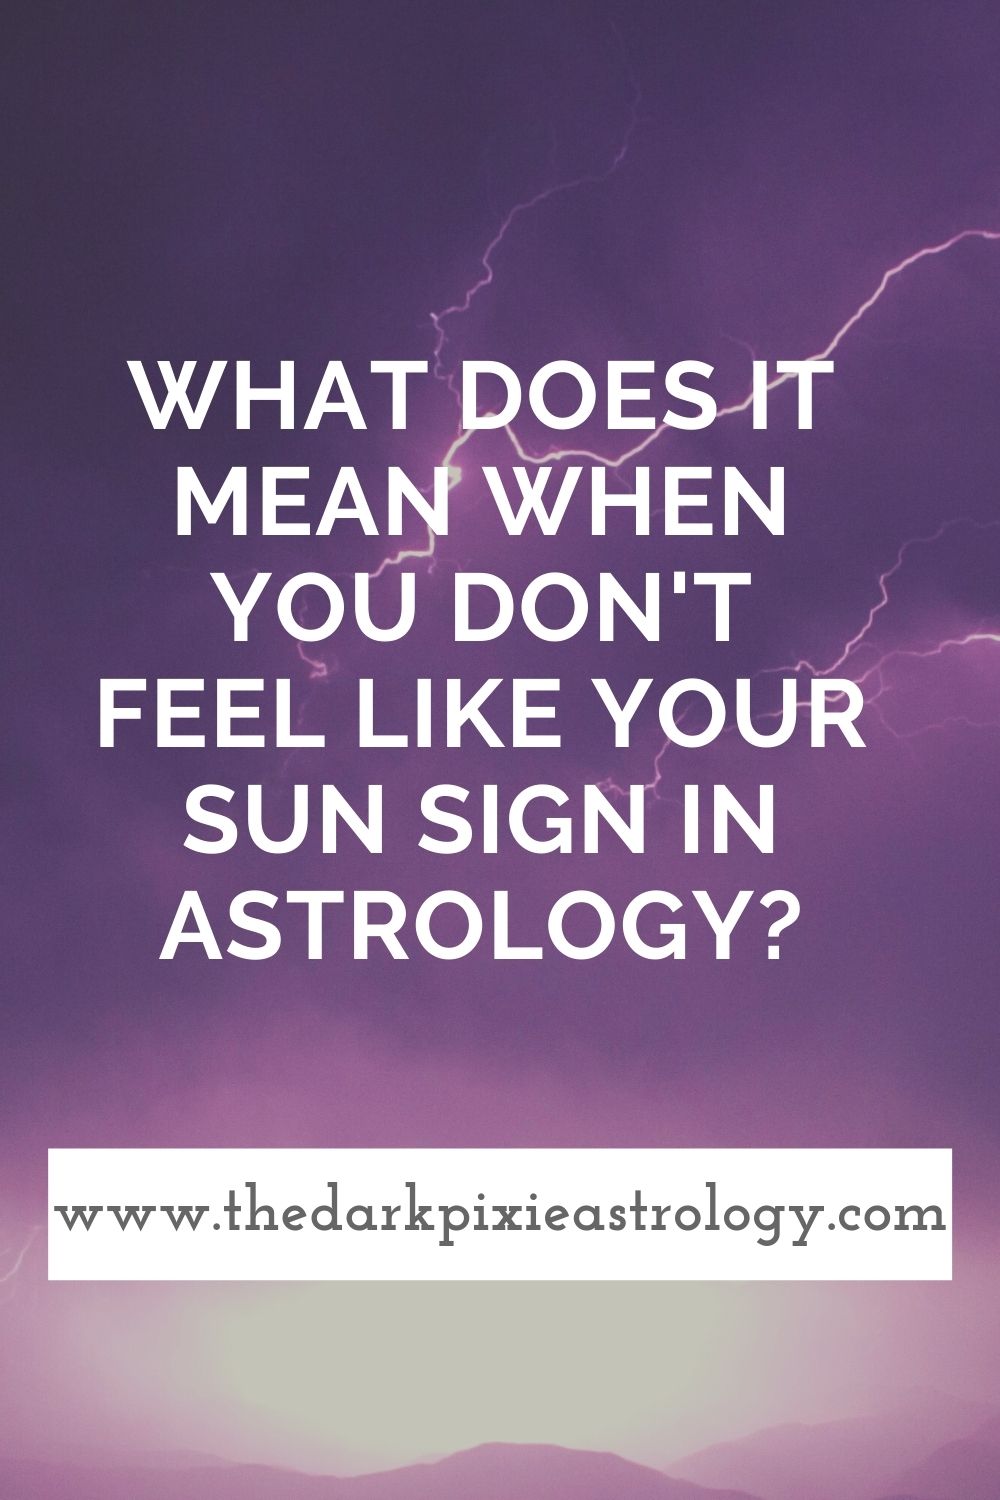 What Does It Mean When You Don't Feel Like Your Sun Sign in Astrology? - The Dark Pixie Astrology